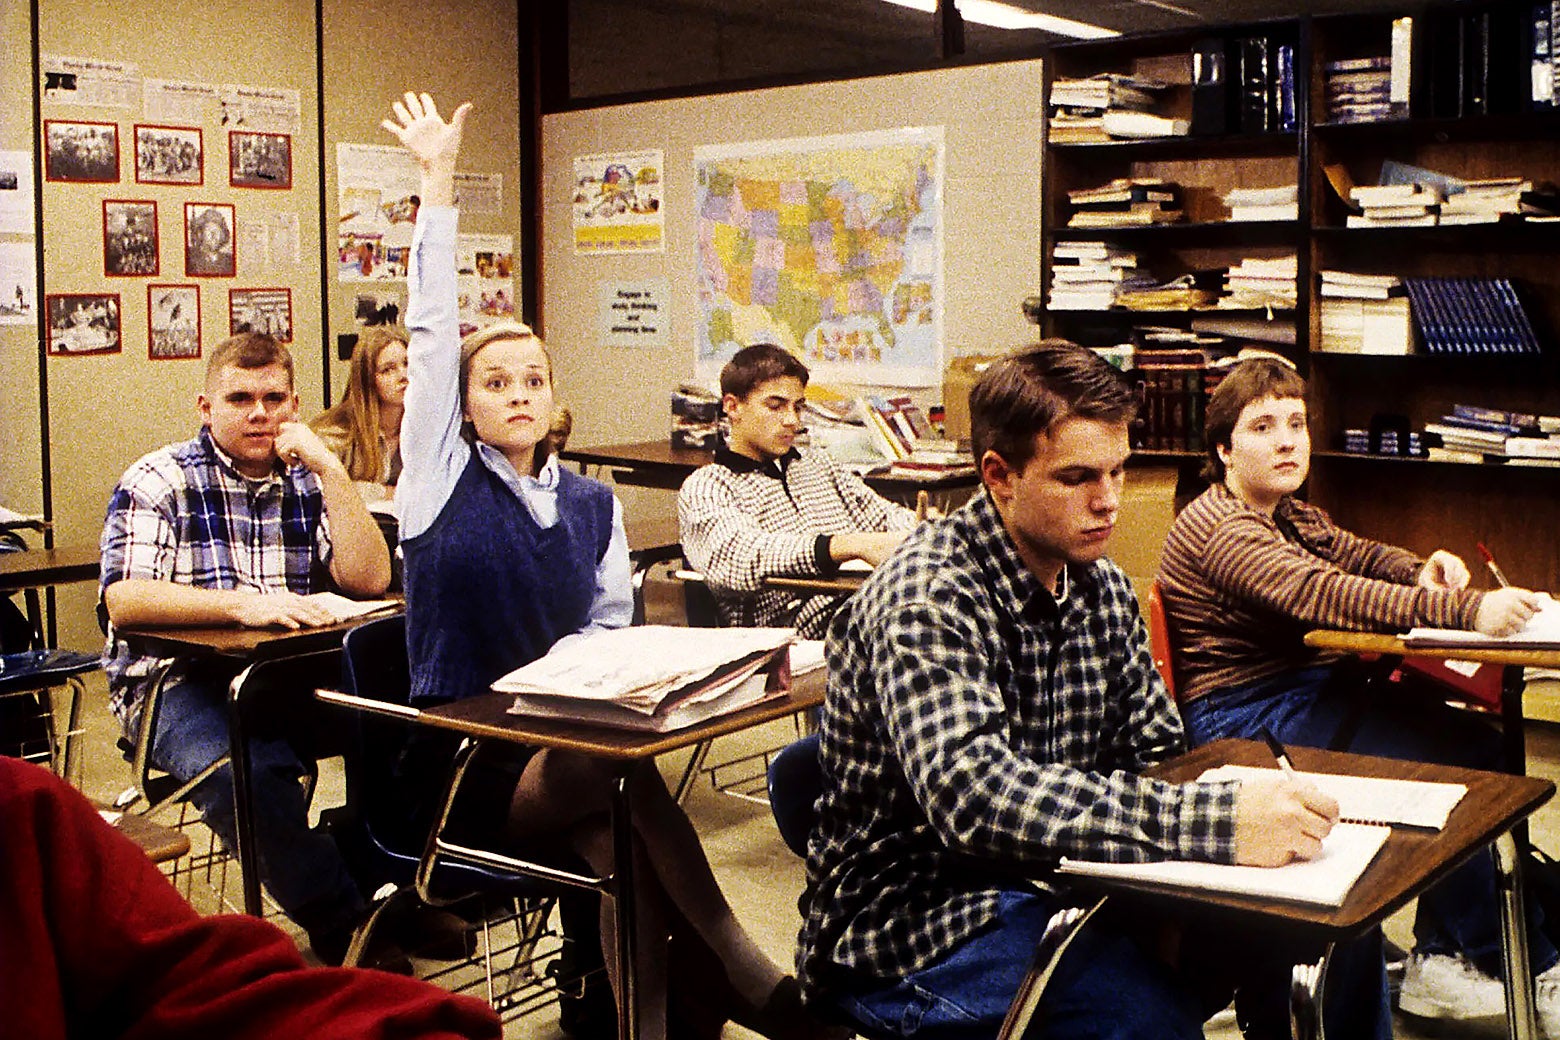 Reese Witherspoon raising her hand in the middle of a full classroom